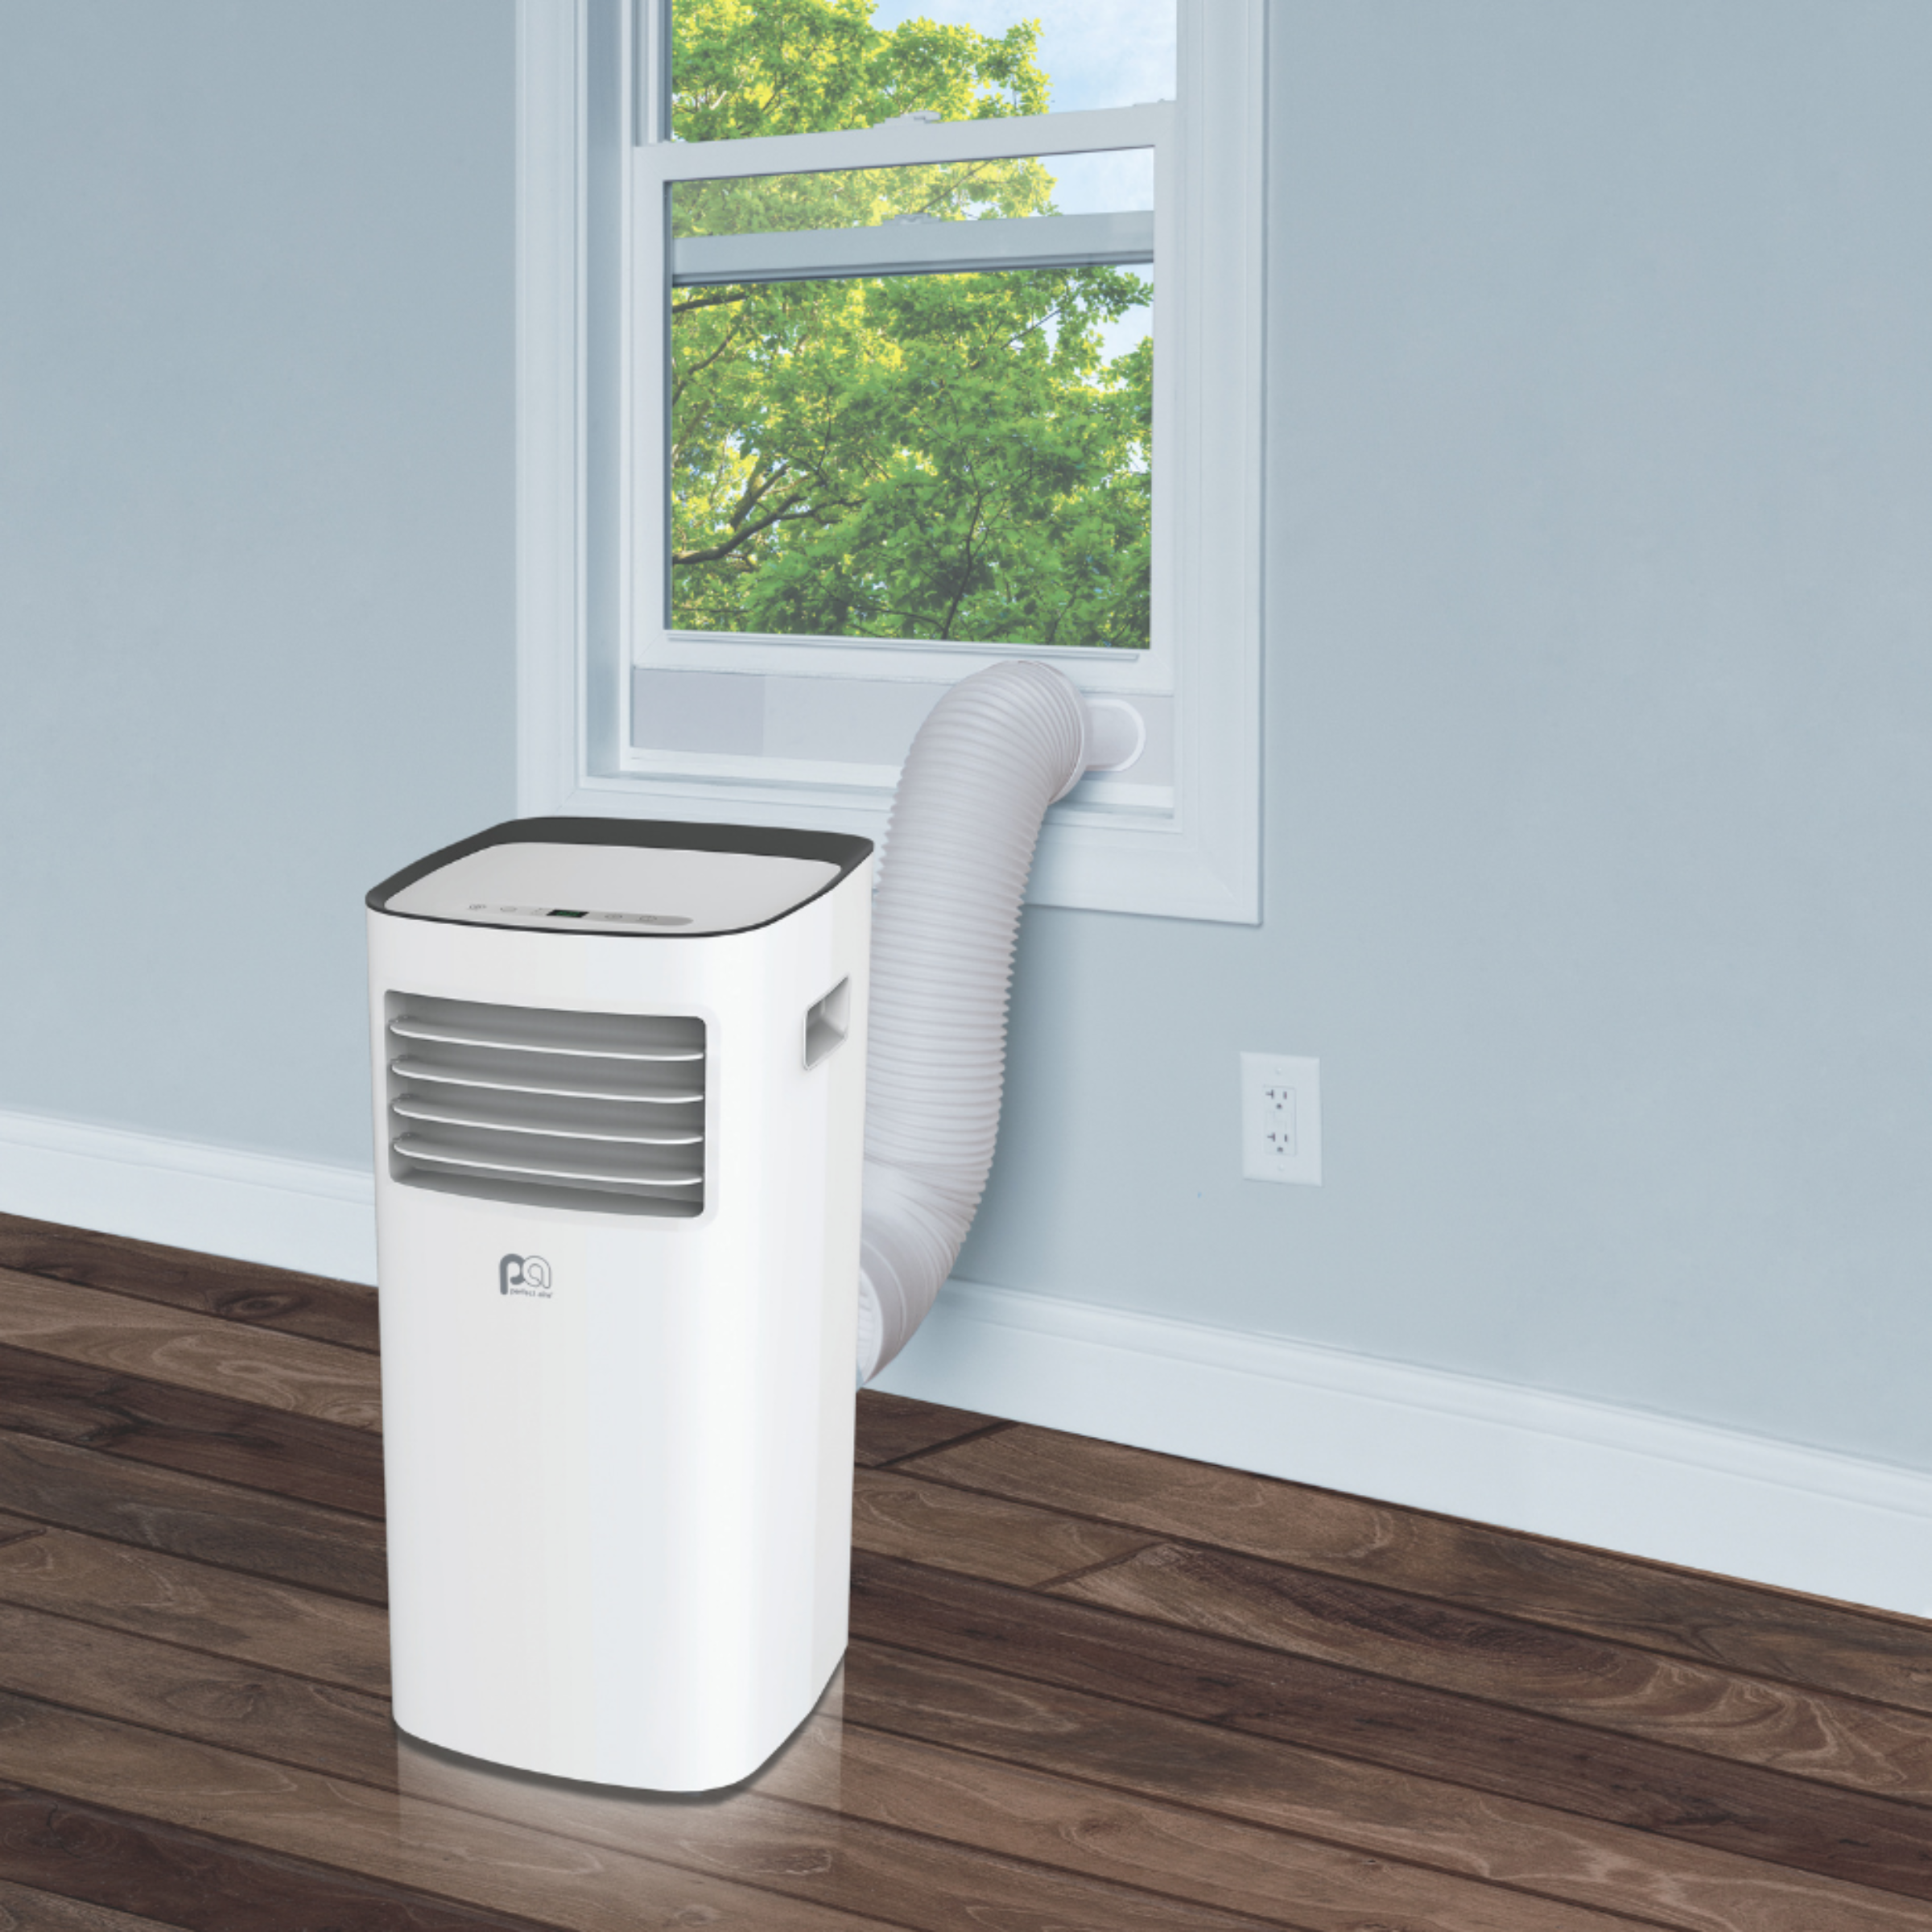 2PORT10000A Perfect Aire 10,000 BTU Compact Portable Air Conditioner - CEC, Sq. ft: 400-450 Coverage, With Remote Control, Non-Ozone Depleting R32 Refrigerant, EER = 10.57